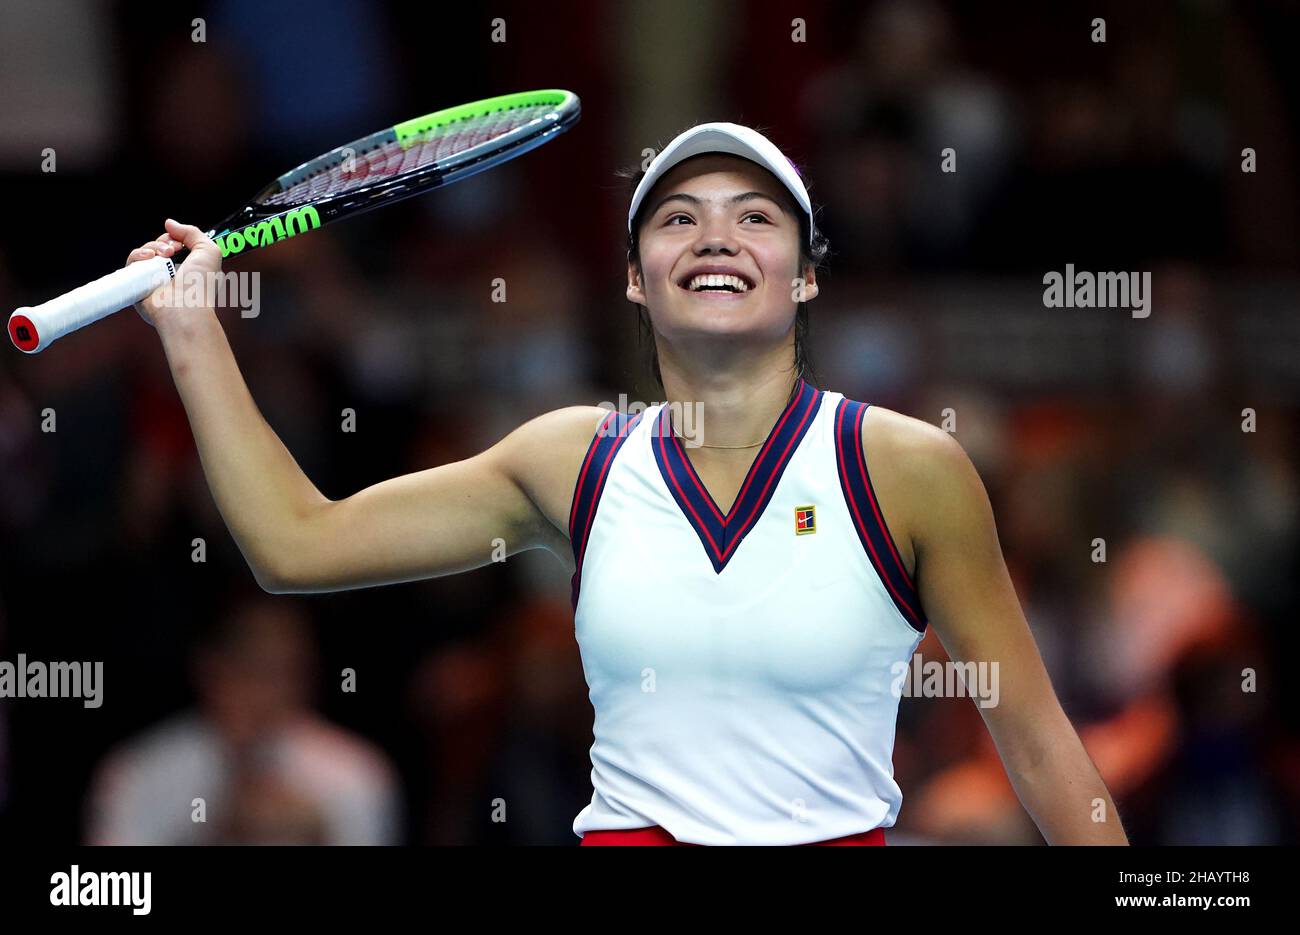 File photo dated 28-11-2021 of Emma Raducanu. Raducanu’s spectacular US Open triumph was the highlight of the 2021 season, winning all 10 matches in straight sets. It was at Wimbledon that Raducanu showed the British public and the tennis world what a special talent she is, reaching the fourth round with displays of poise and intelligence that belied her lack of experience. Ranked 338 at the start of the Championships, Raducanu finished the year as only the fifth British woman to make it into the world’s top 20 despite playing in just 10 tournaments. Issue date: Thursday December 16, 2021. Stock Photo